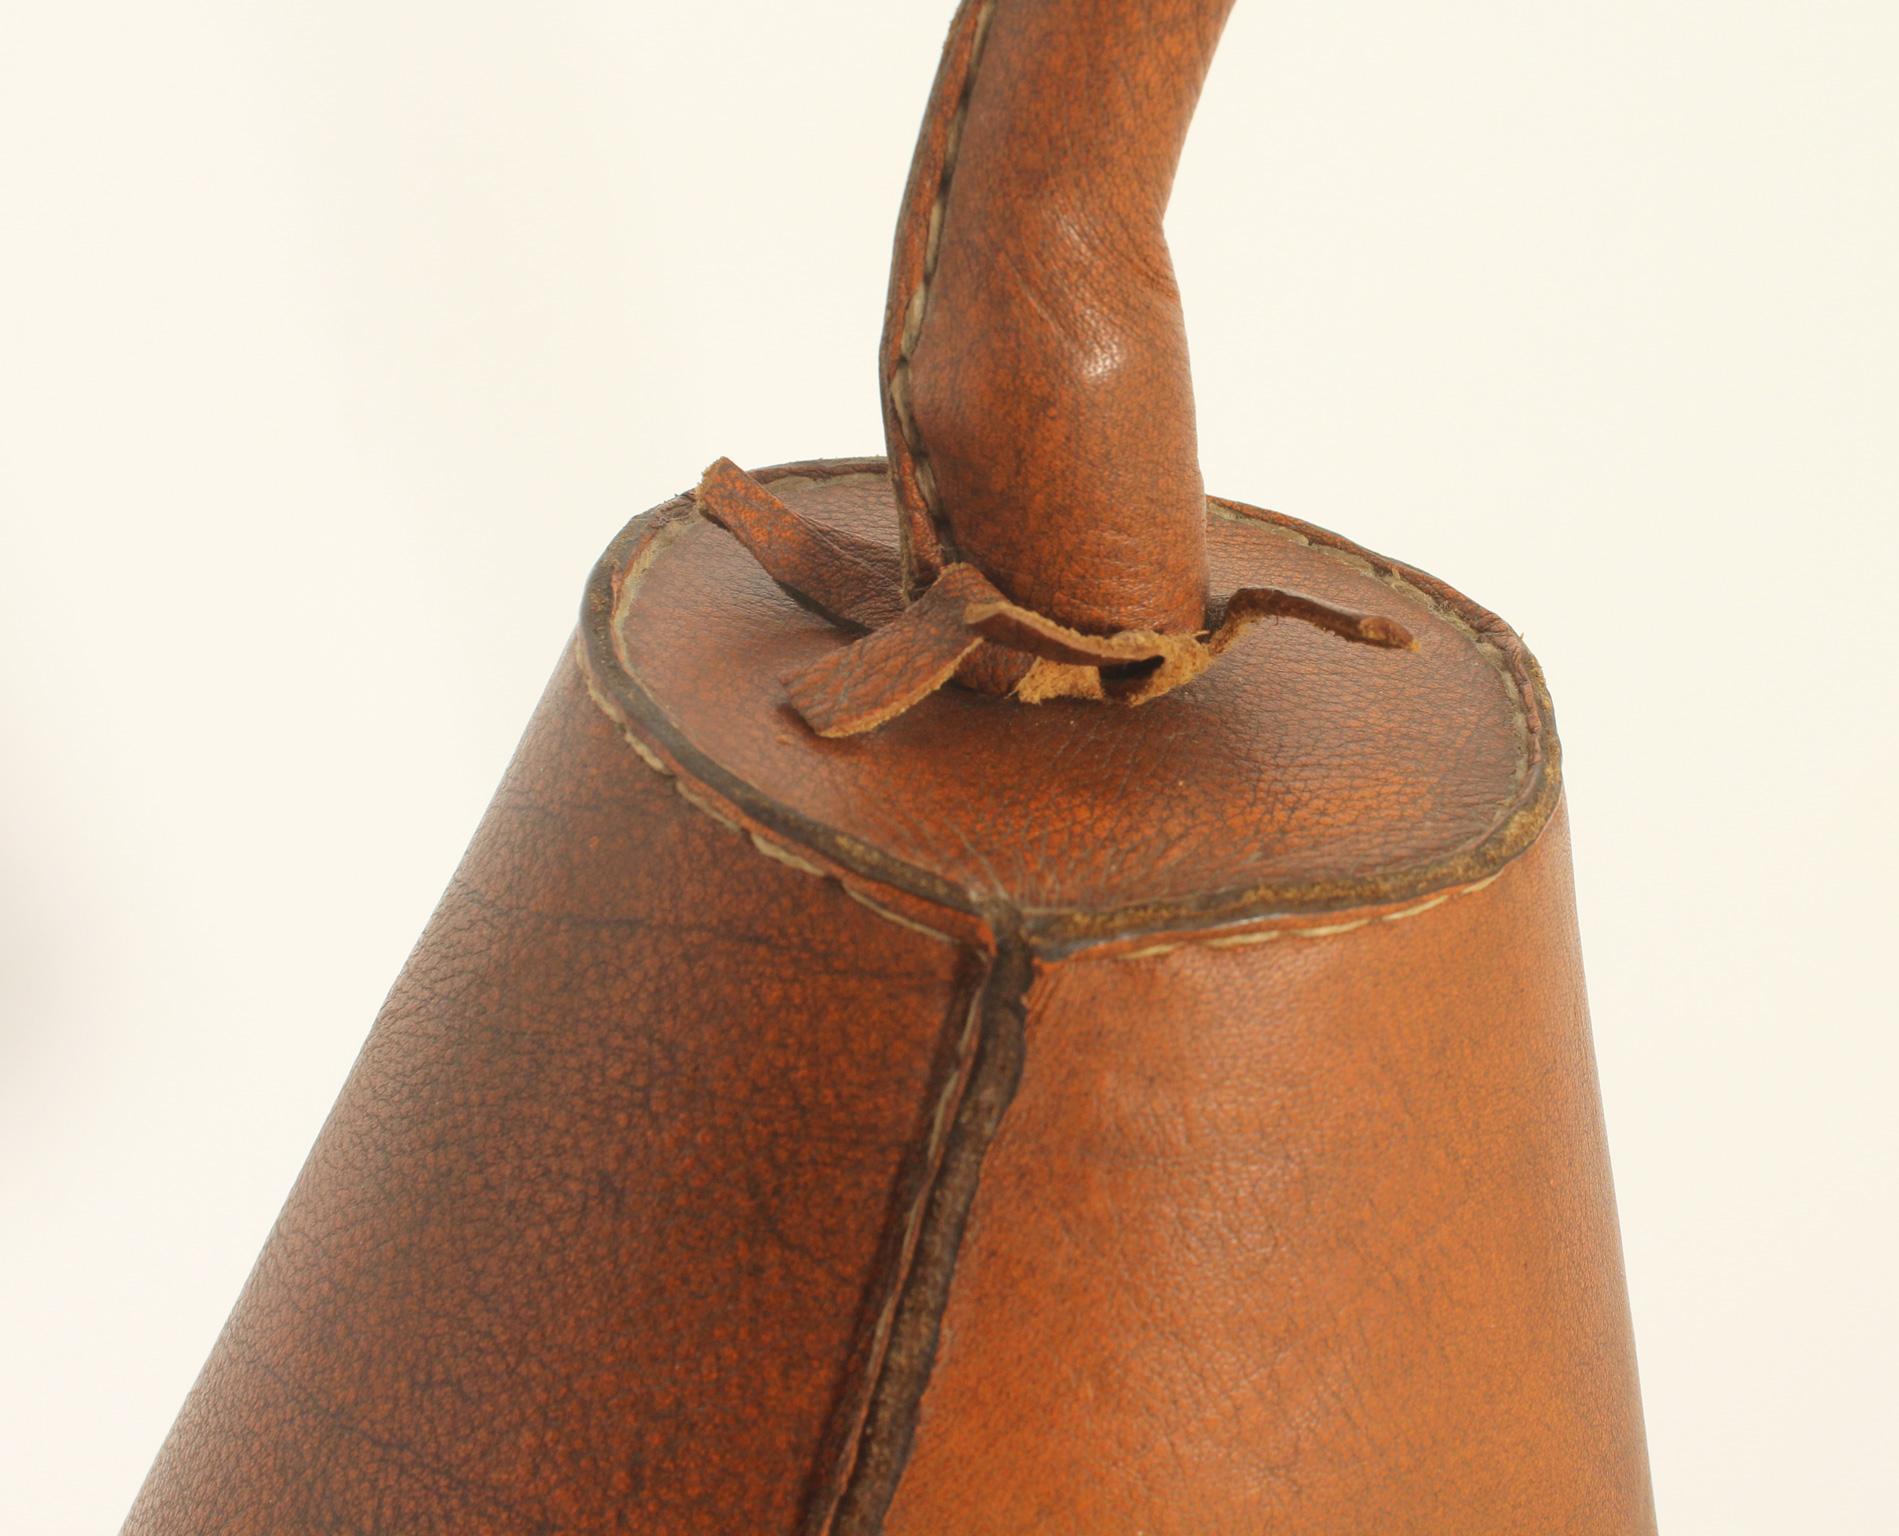 Floor Lamp by Valenti in Brown Leather, Spain, 1950's For Sale 3